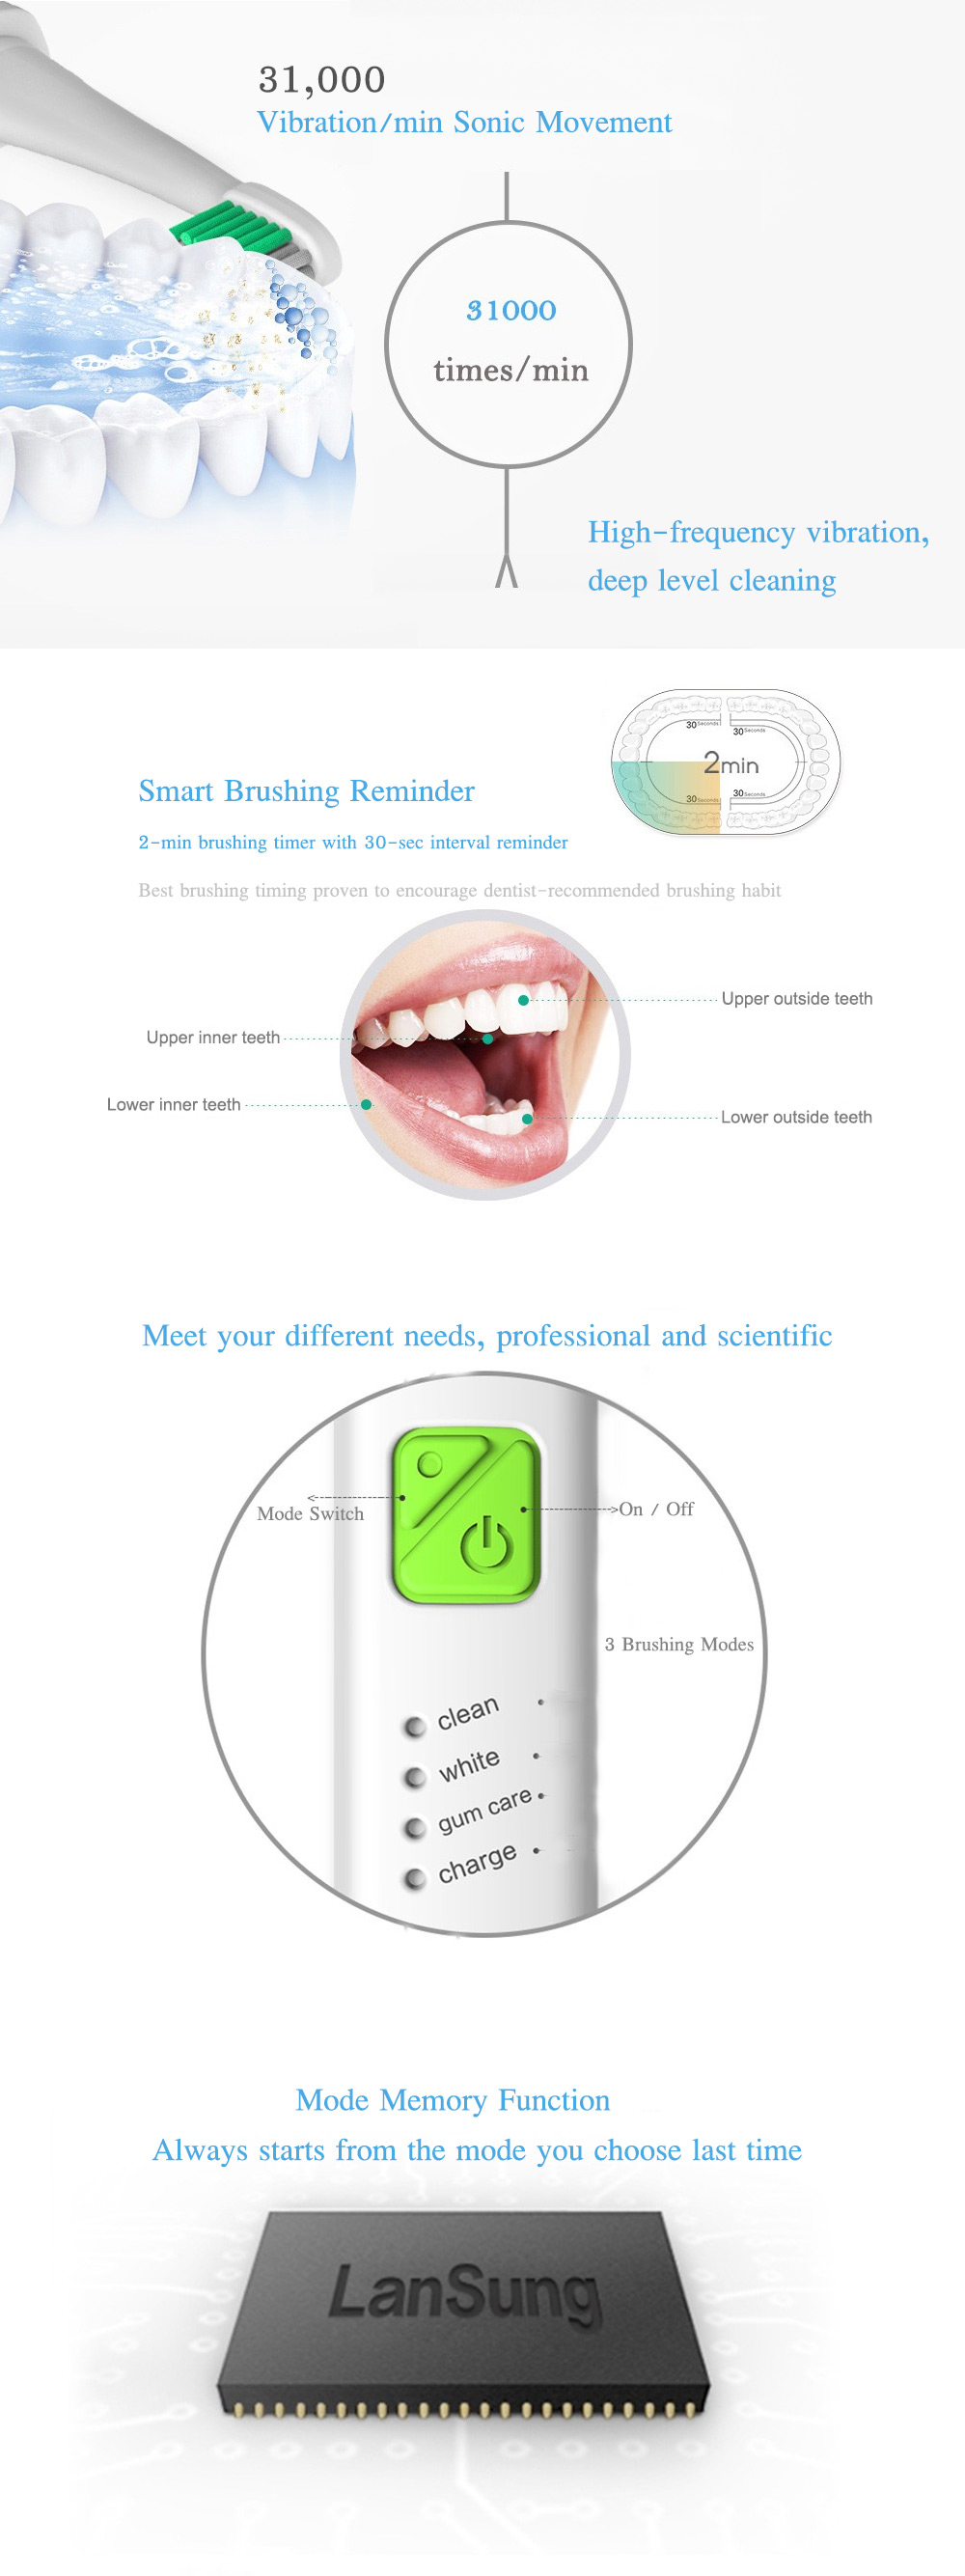 LANSUNG U1 Sonic Electric Toothbrush Quick Charging 2min Timer Waterproof Design with 3 Cleaning Modes